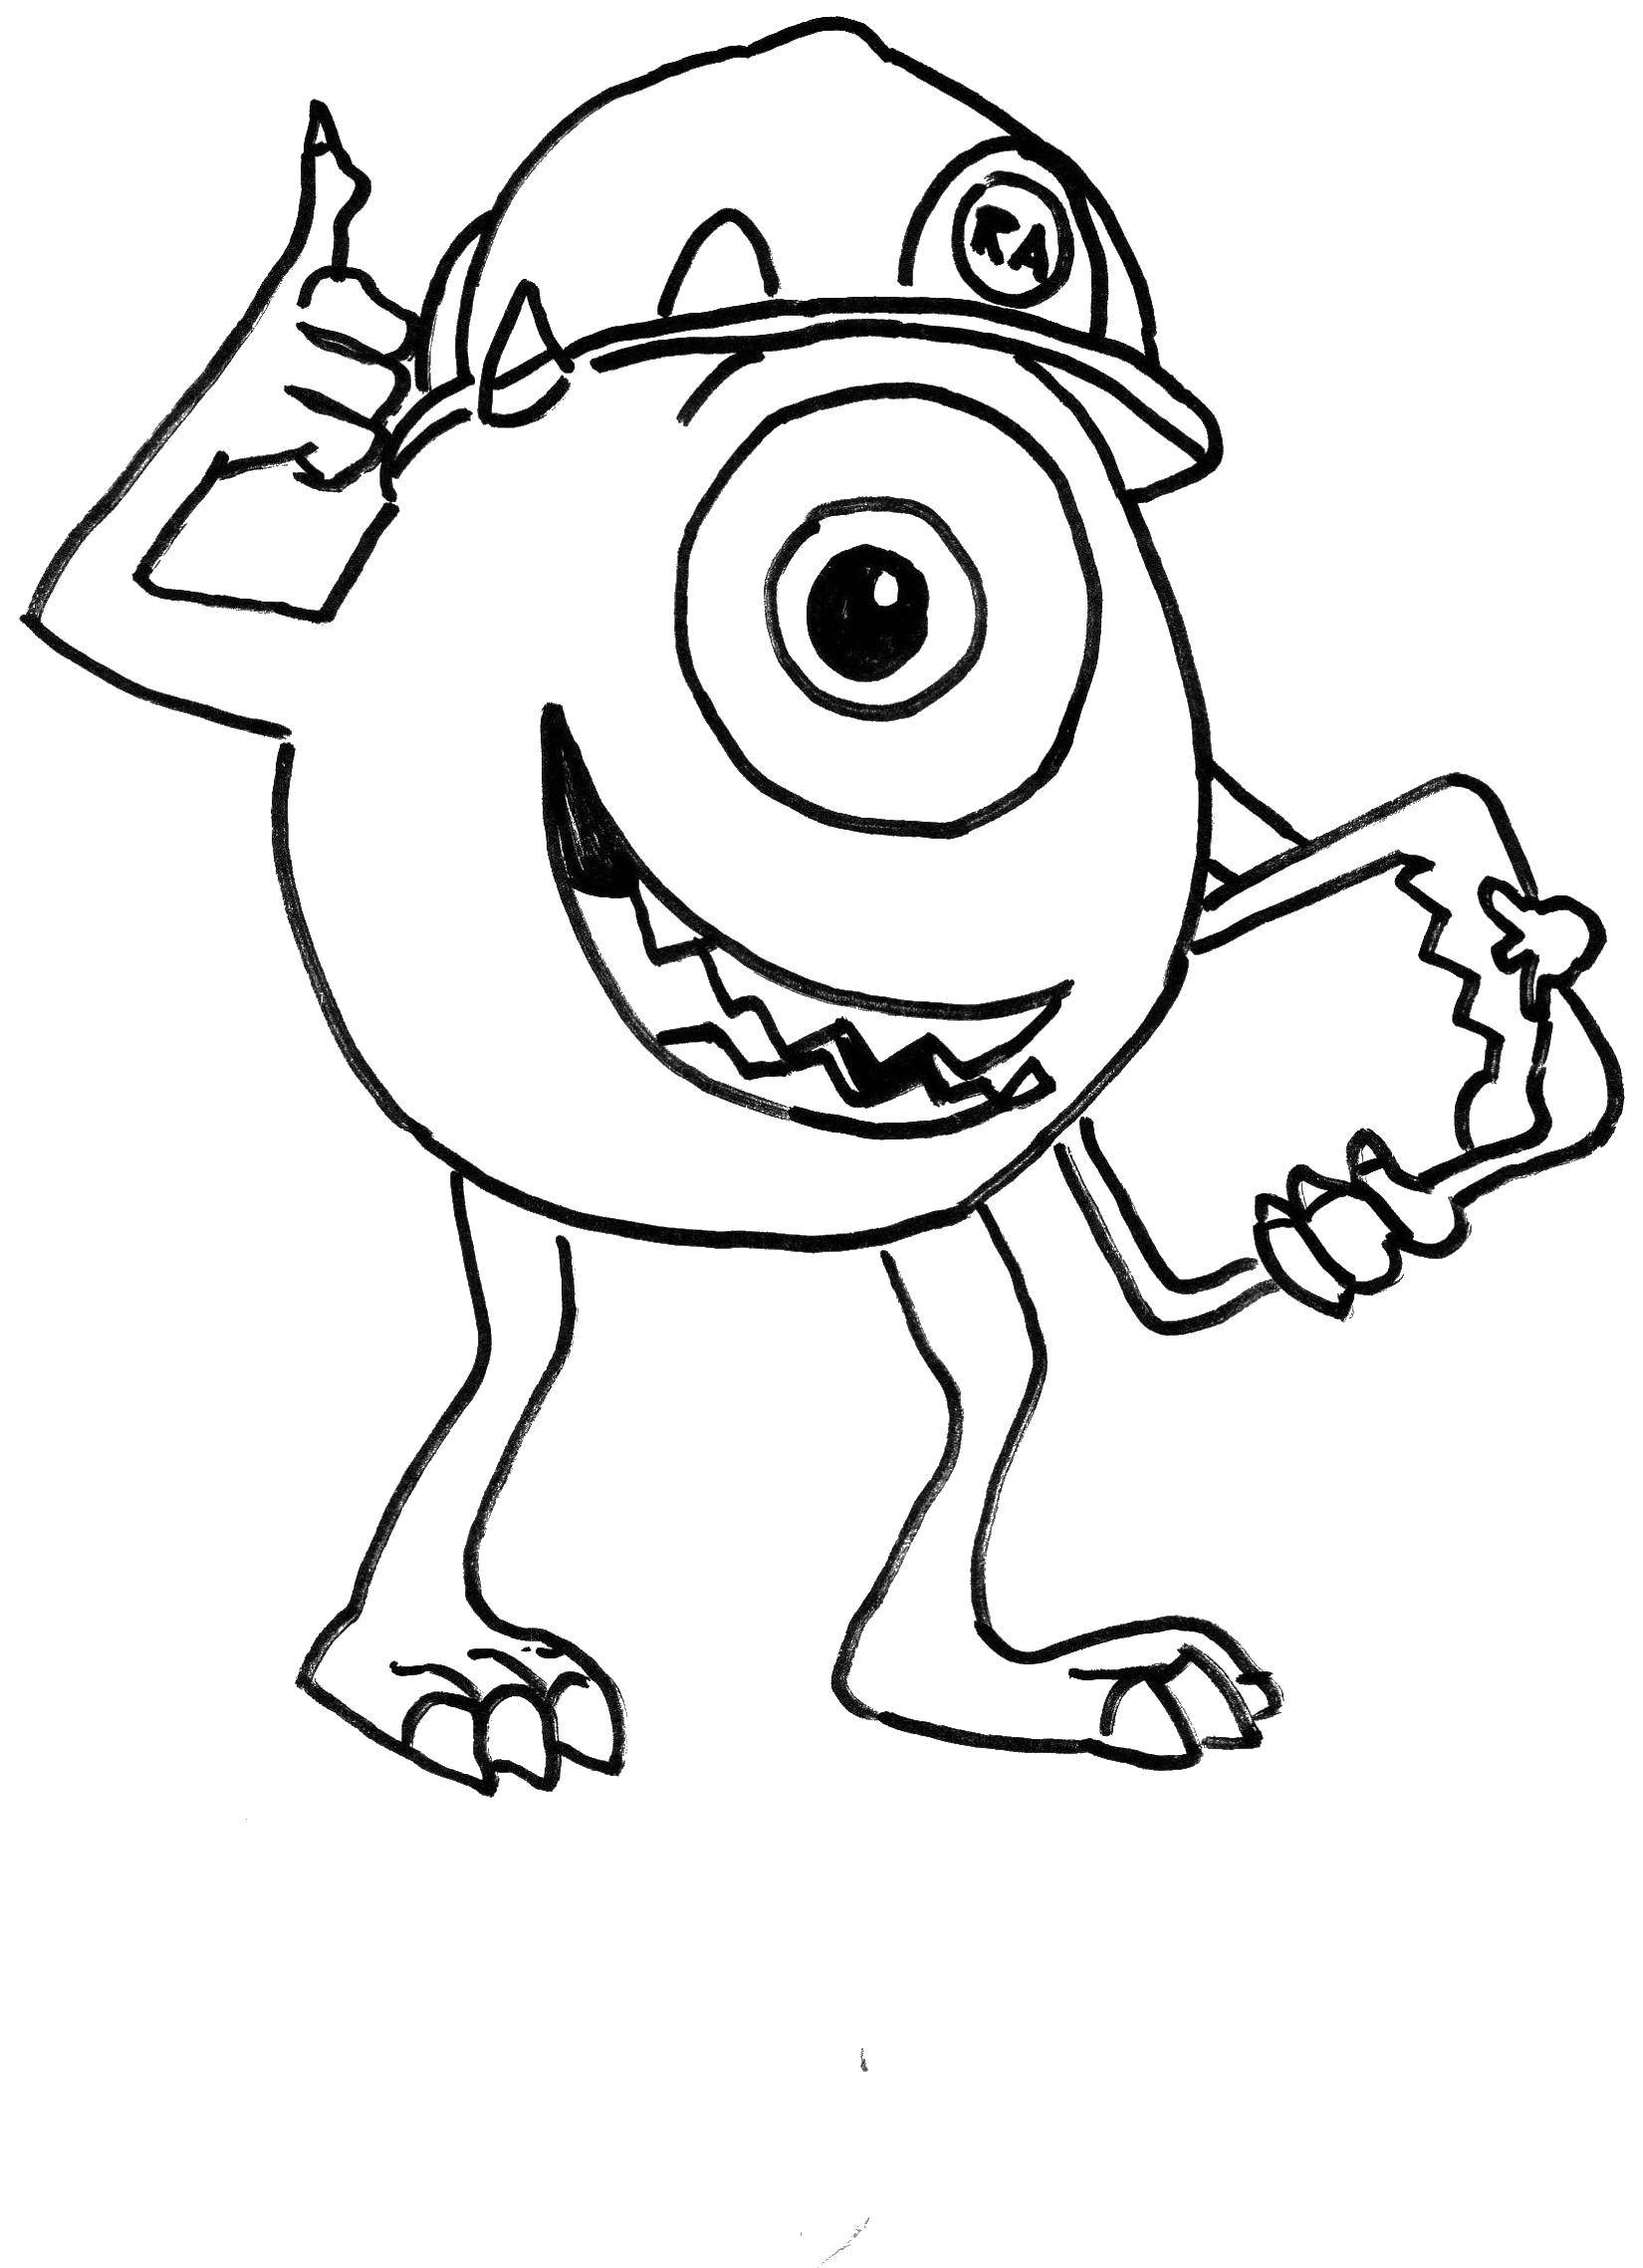 Coloring Mike wazowski. Category coloring monsters Inc. Tags:  Mike Wazowski, monsters Inc.